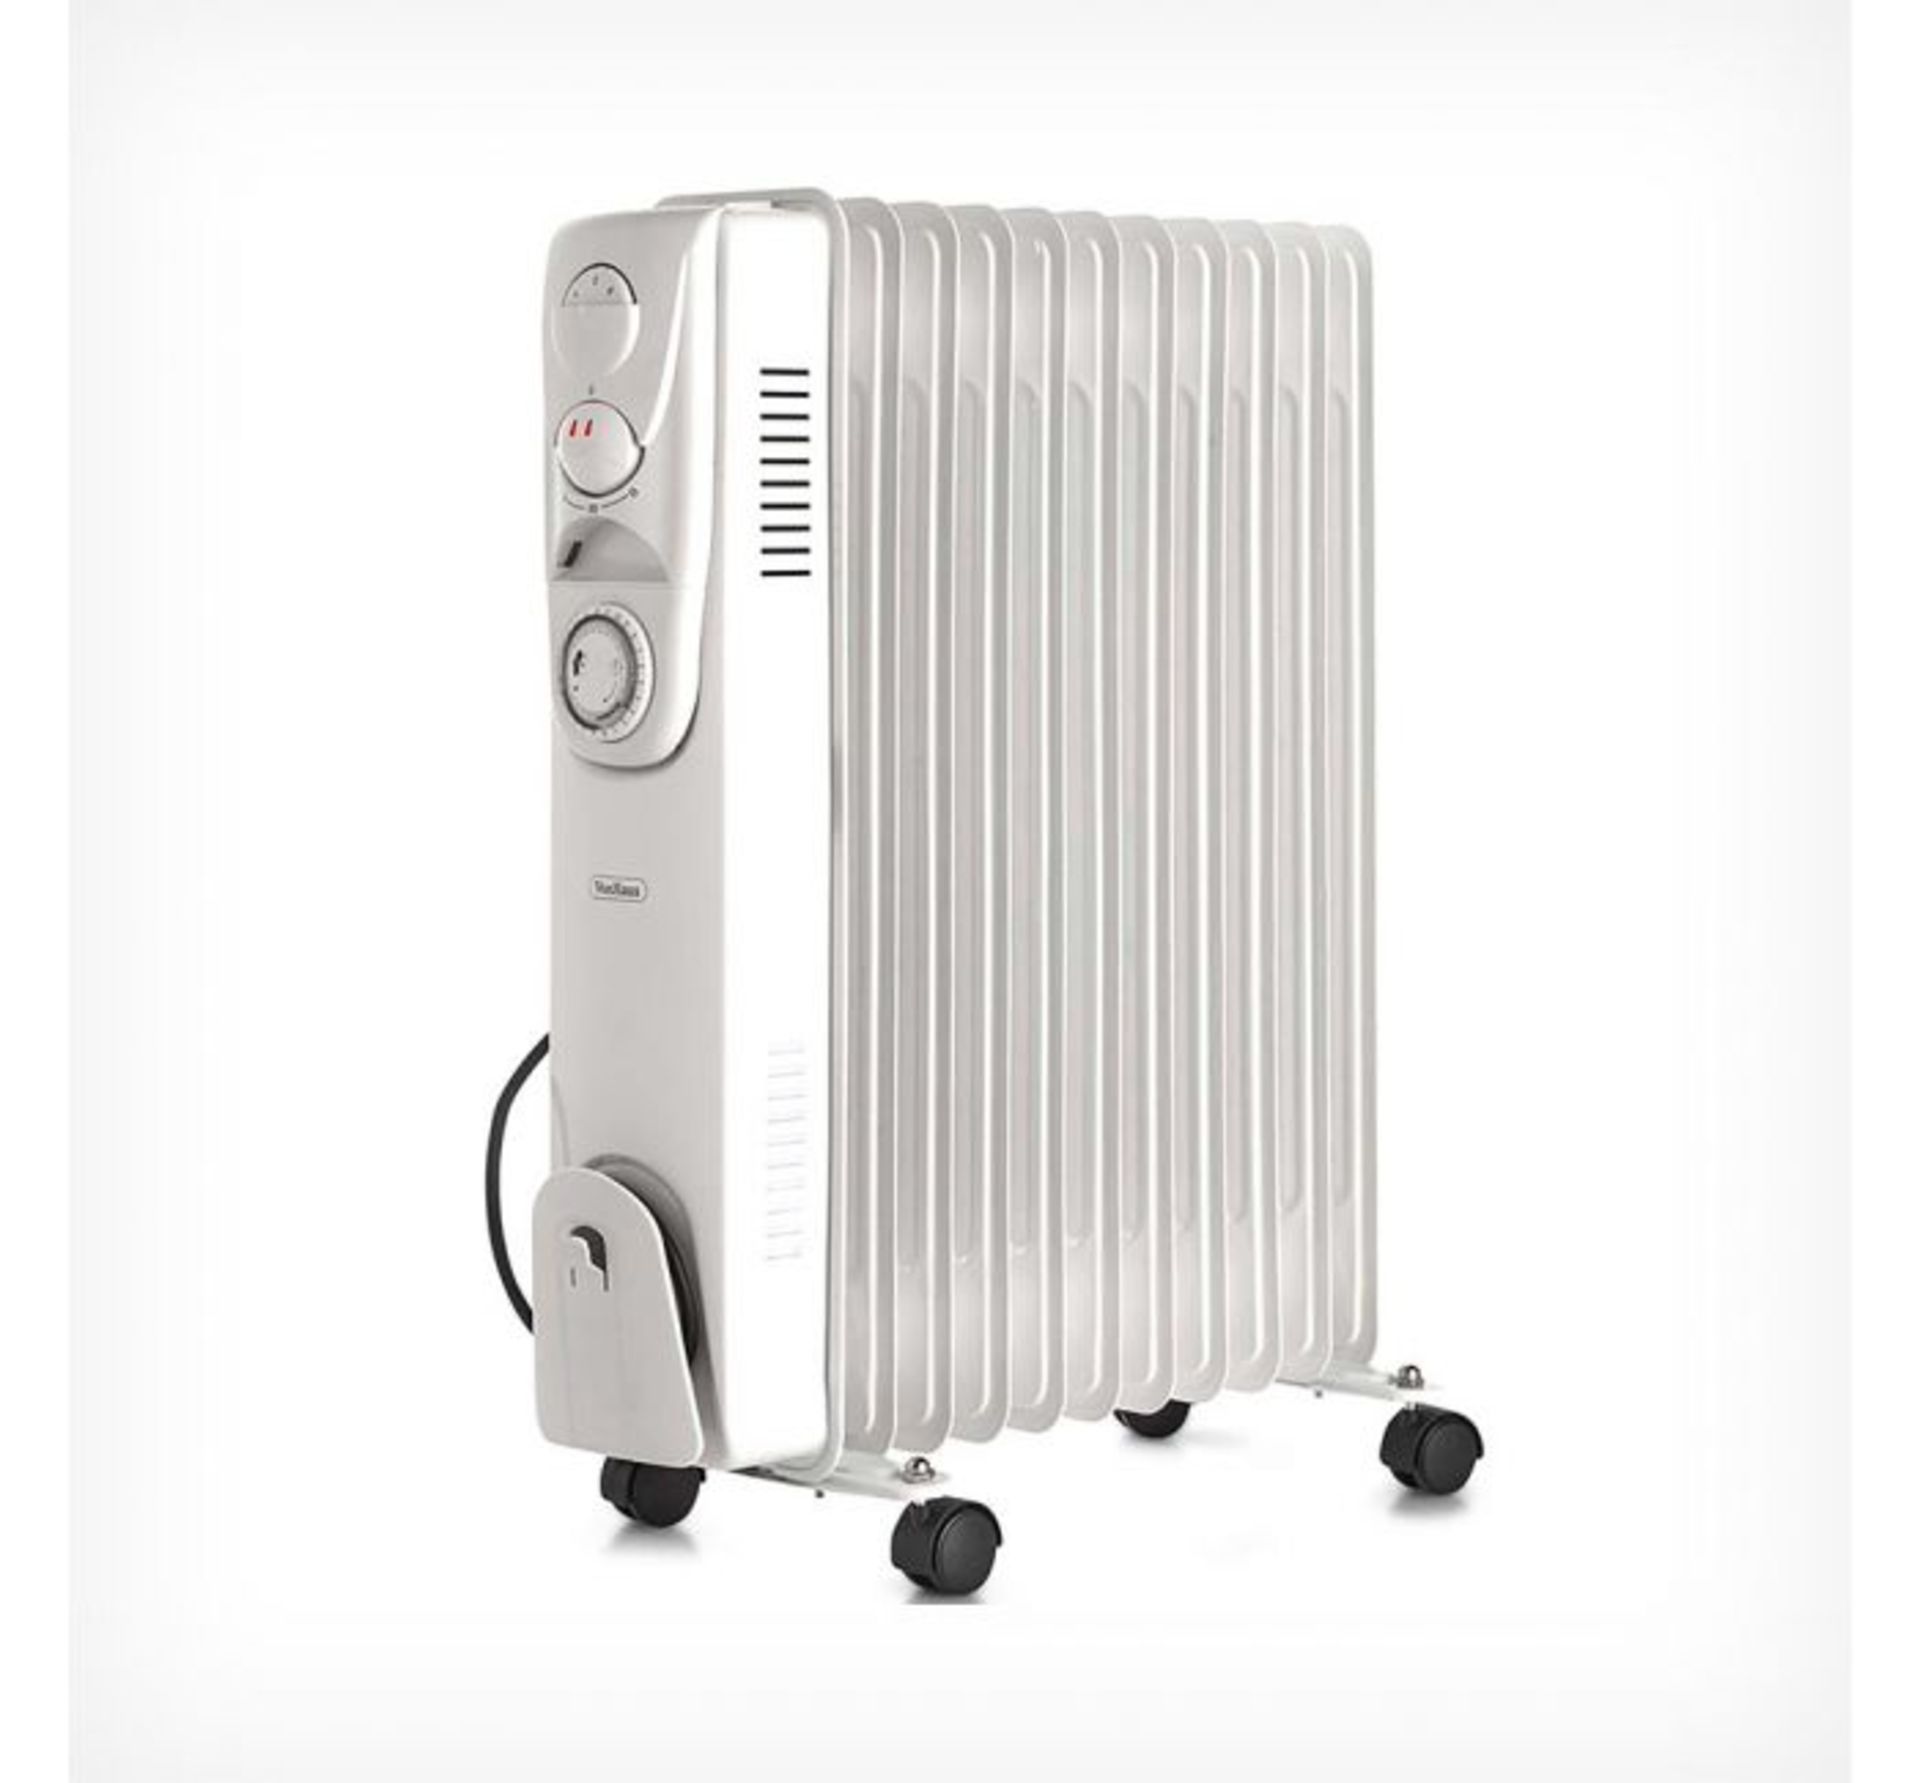 (JL146) 11 Fin 2500W Oil Filled Radiator - White Suitable for areas up to 28 square metres 3 ...(( - Image 2 of 3